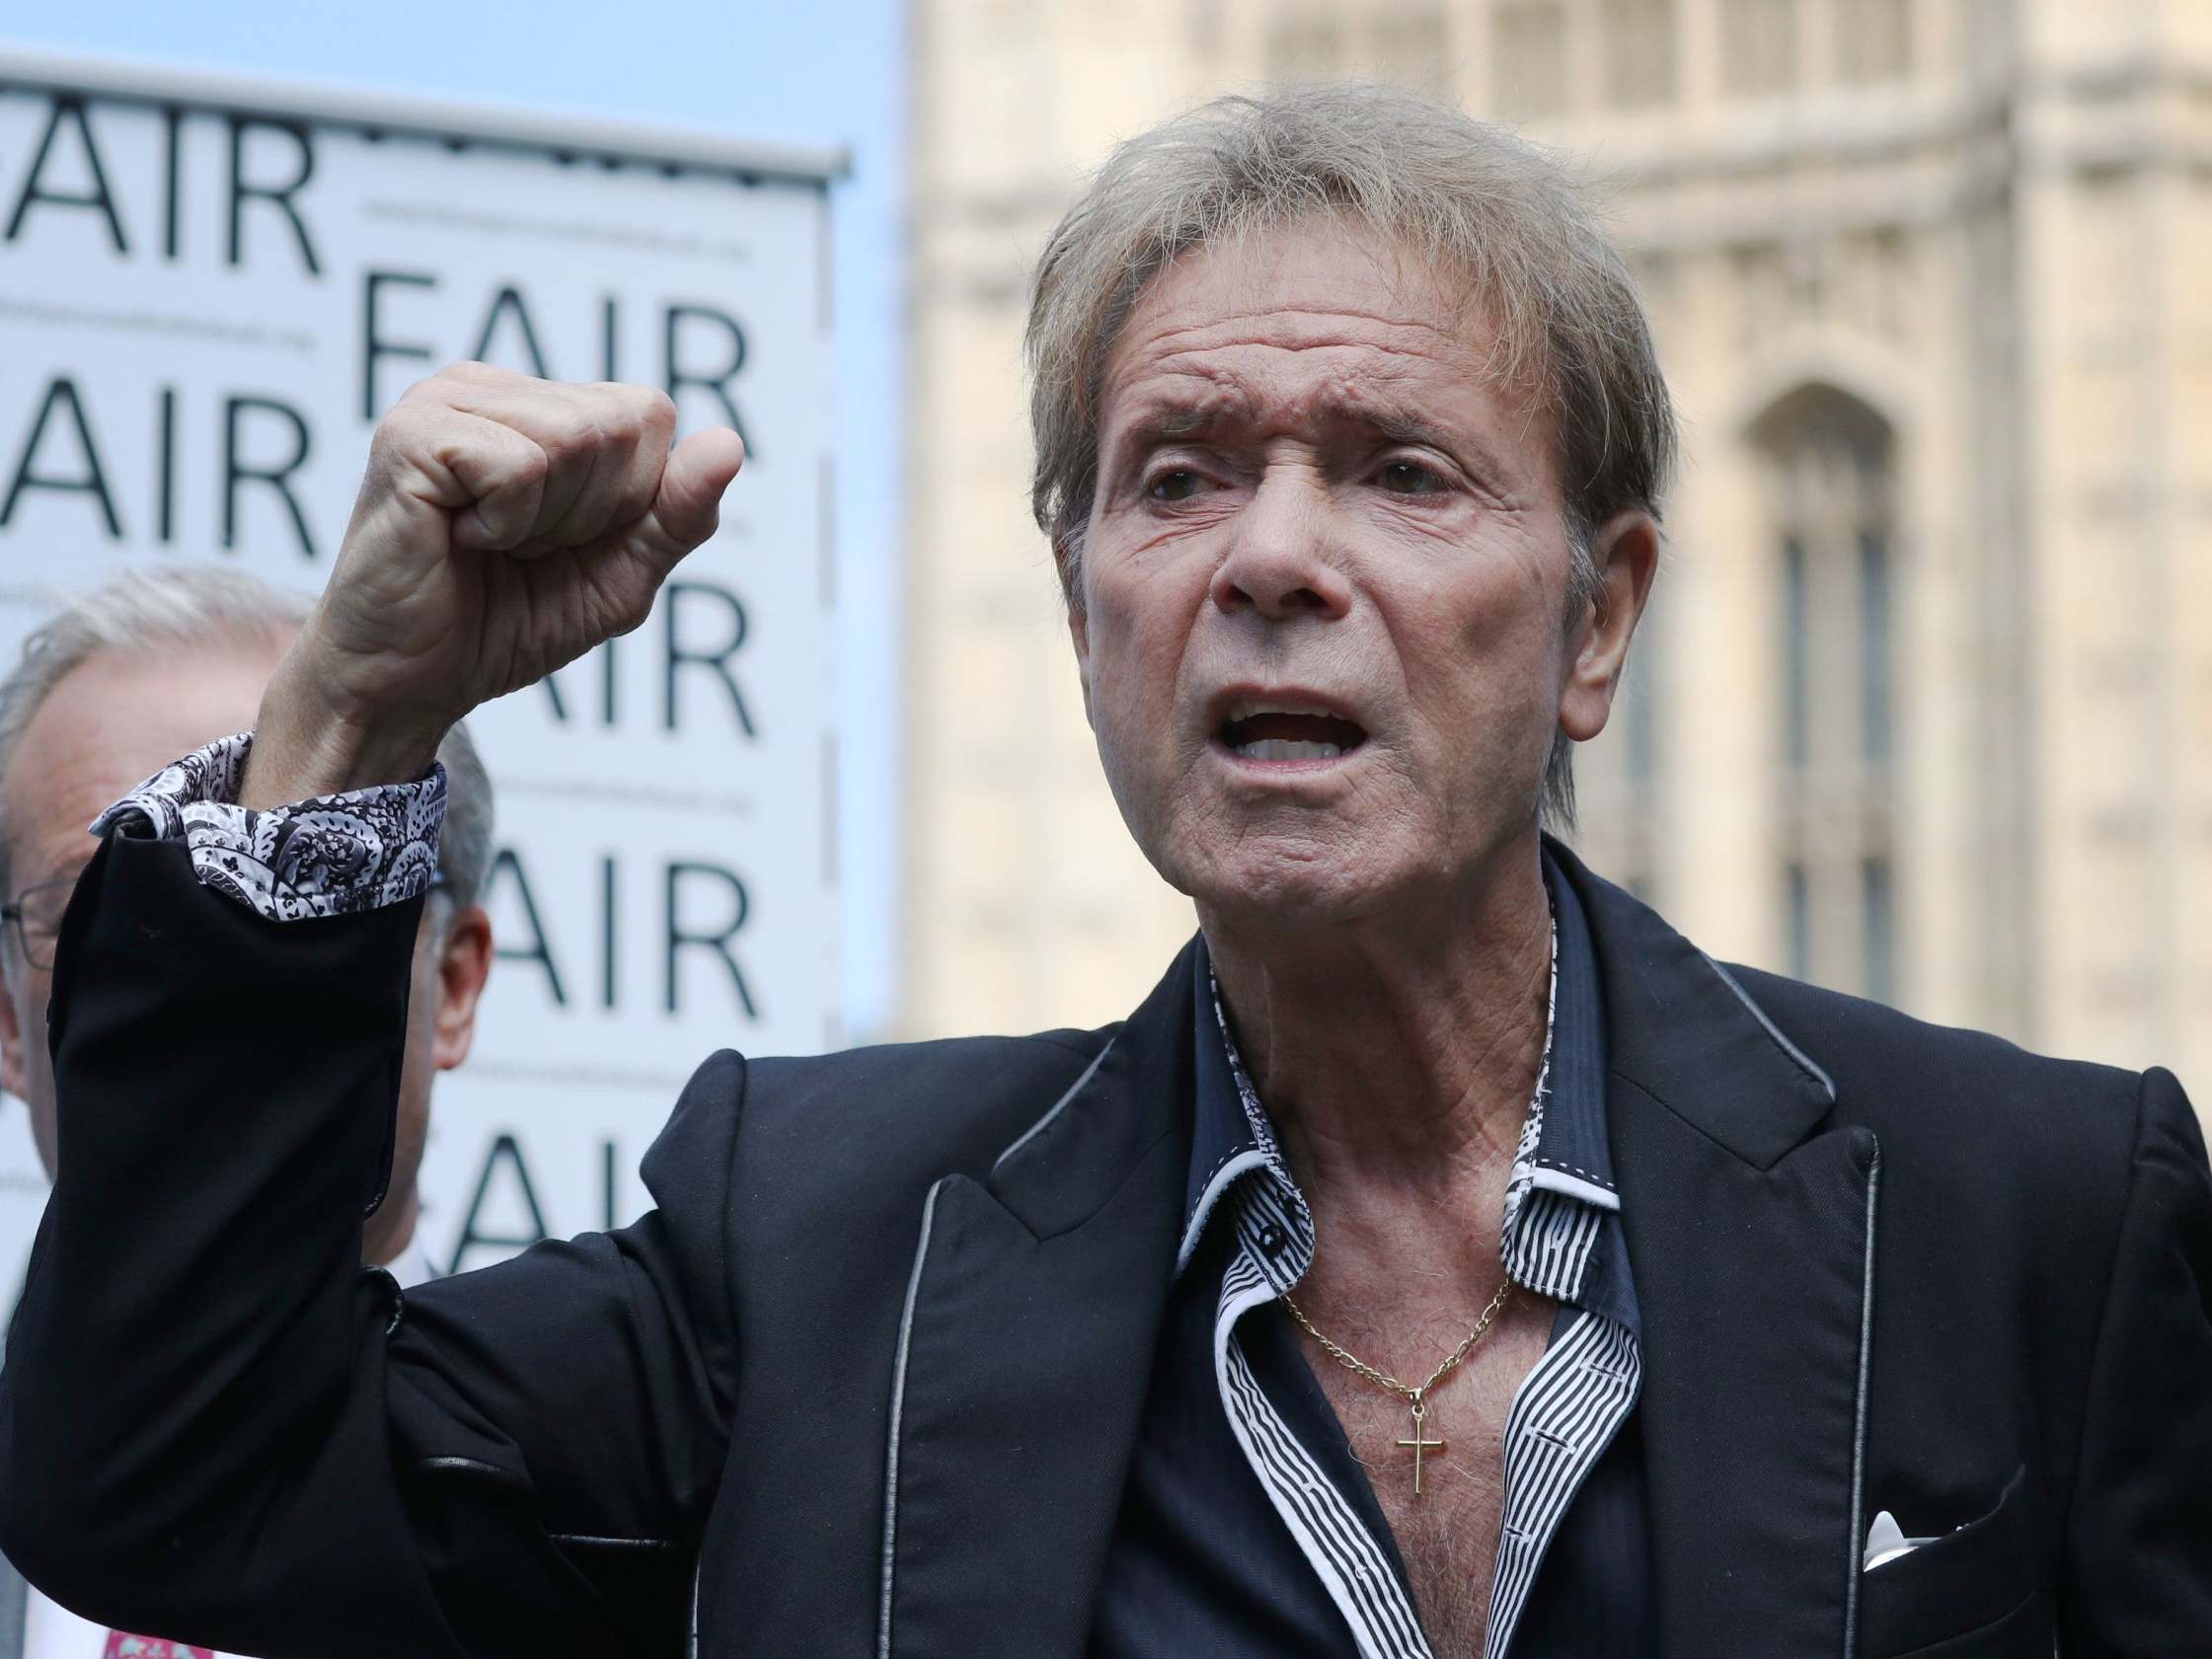 Sir Cliff Richard launches a campaign for a ban on naming sexual crime suspects unless they are charged